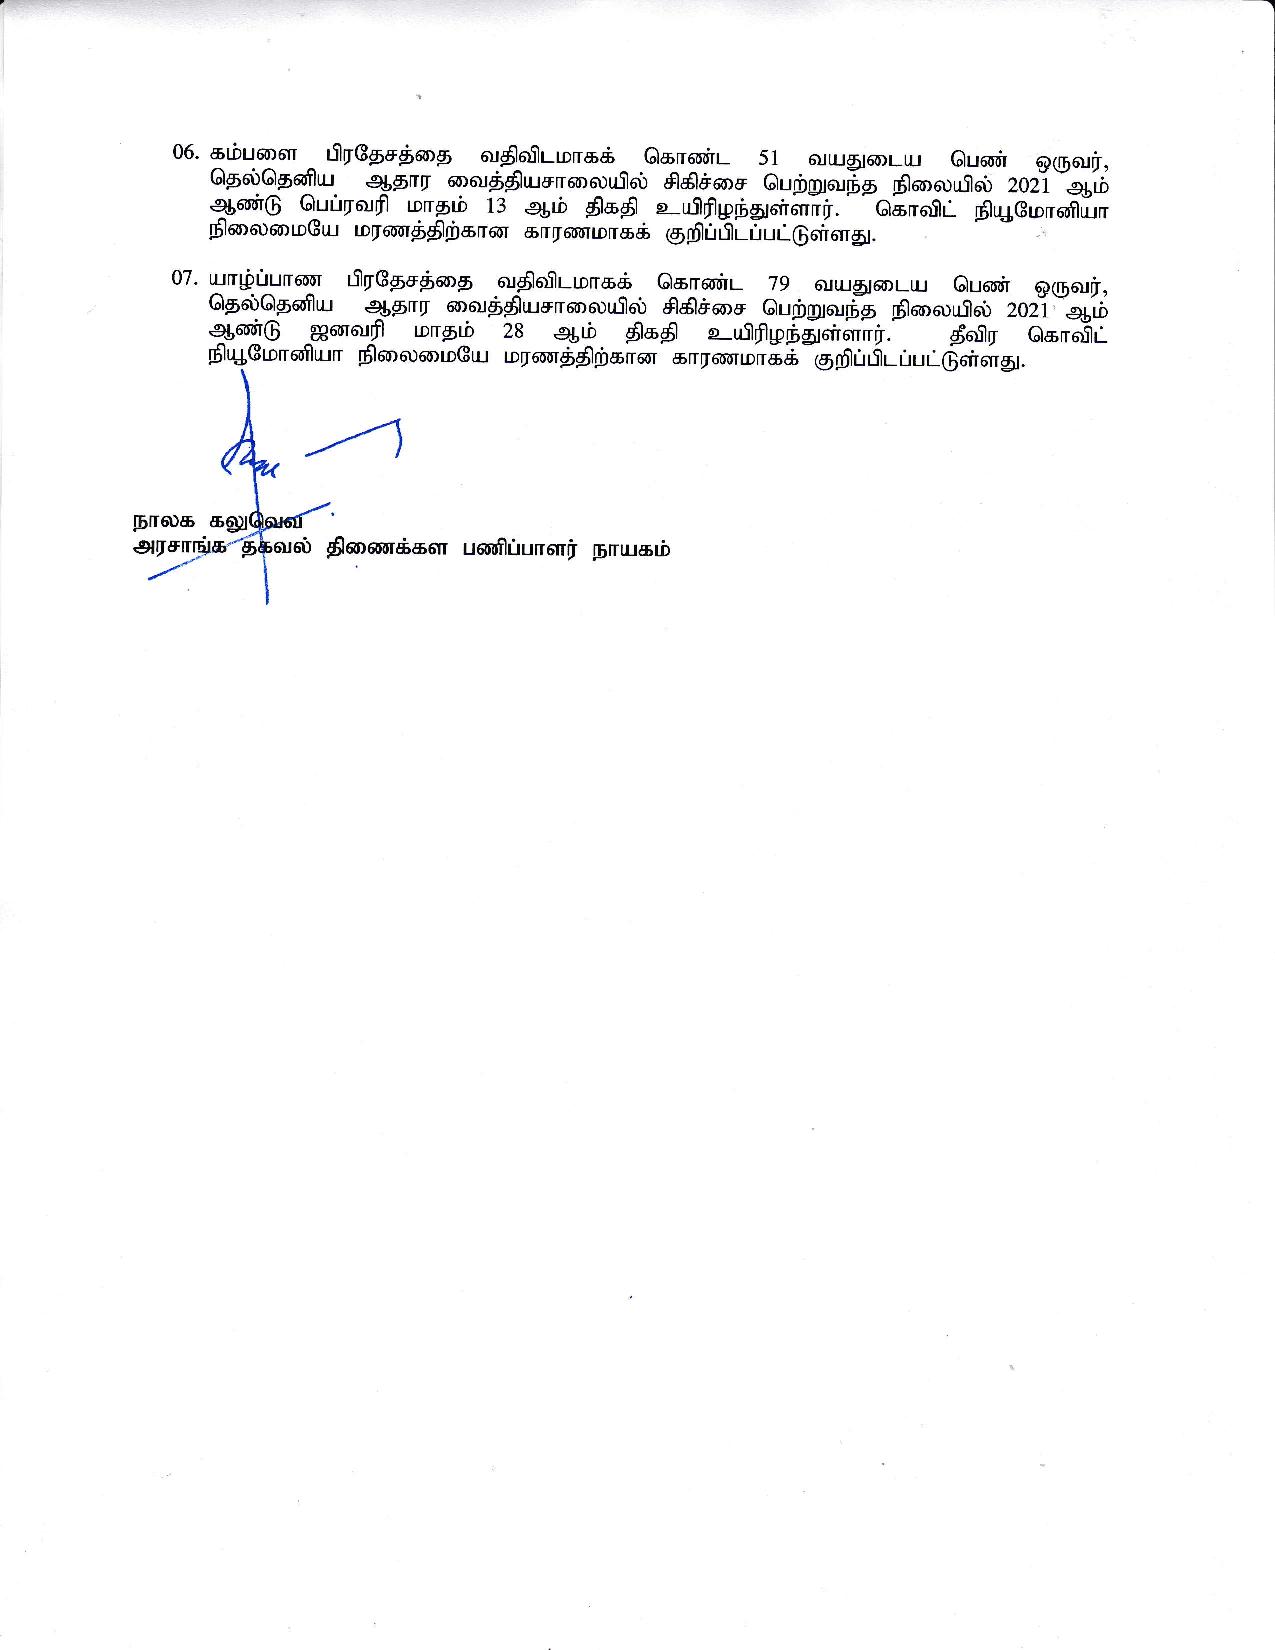 Press Release 166 Tamil page 002